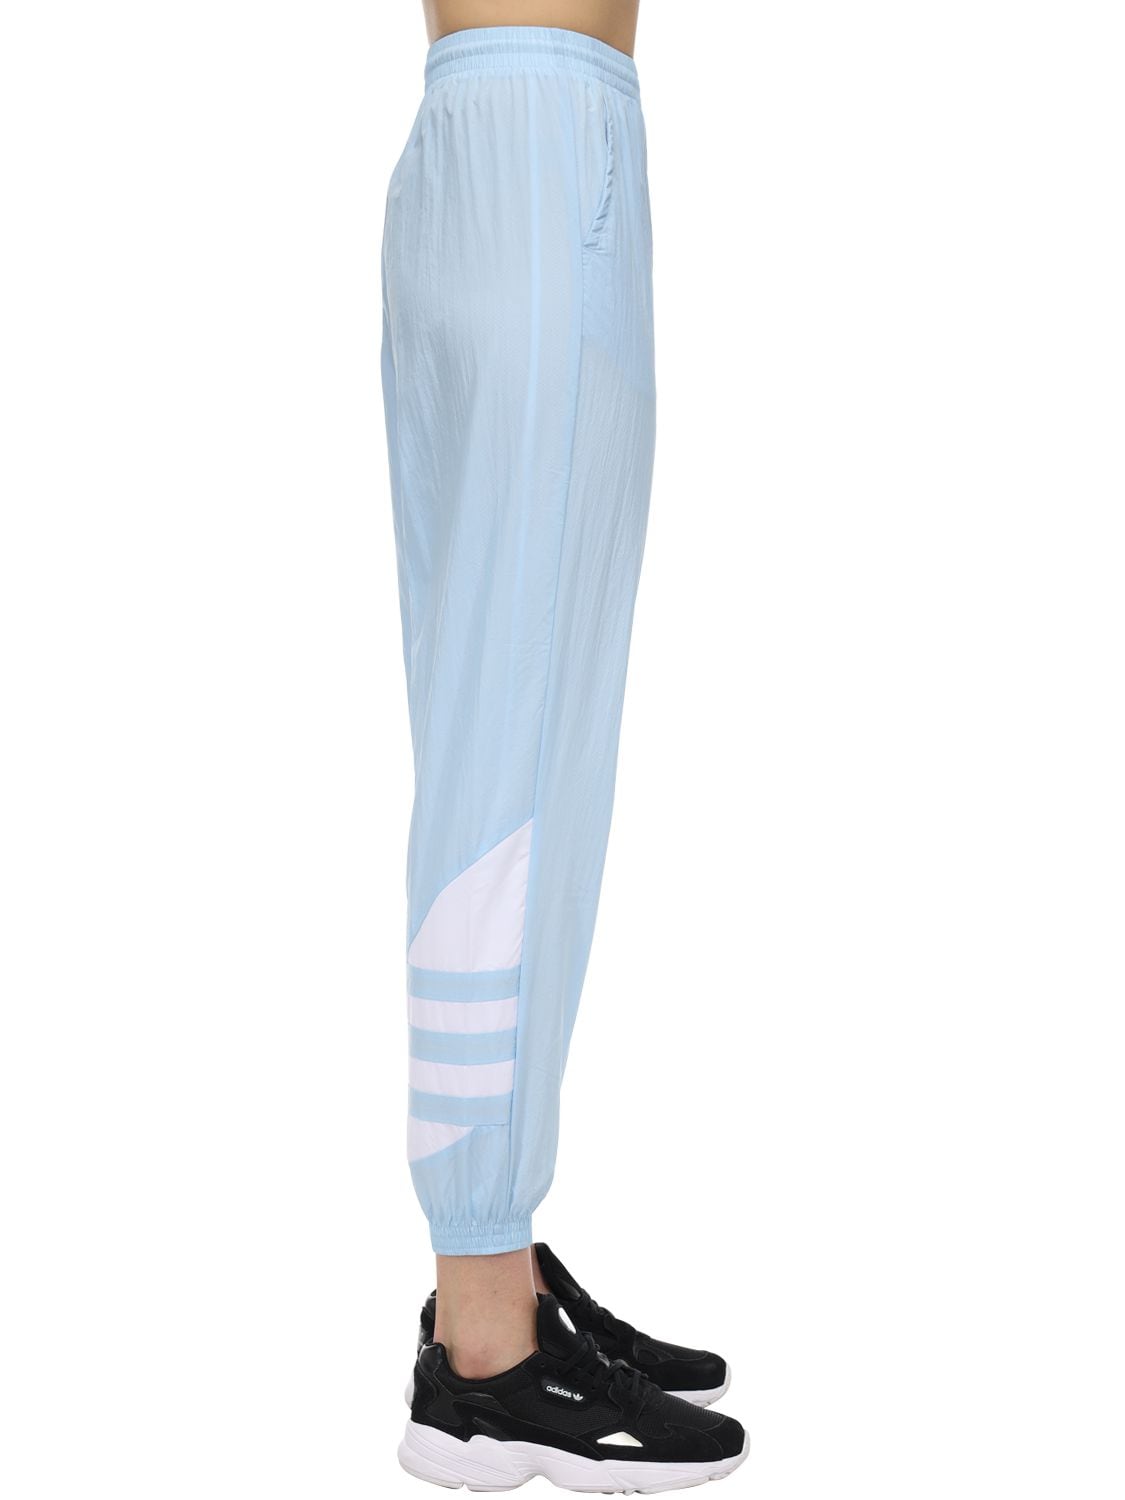 Get Baby Blue Adidas Track Pants Images